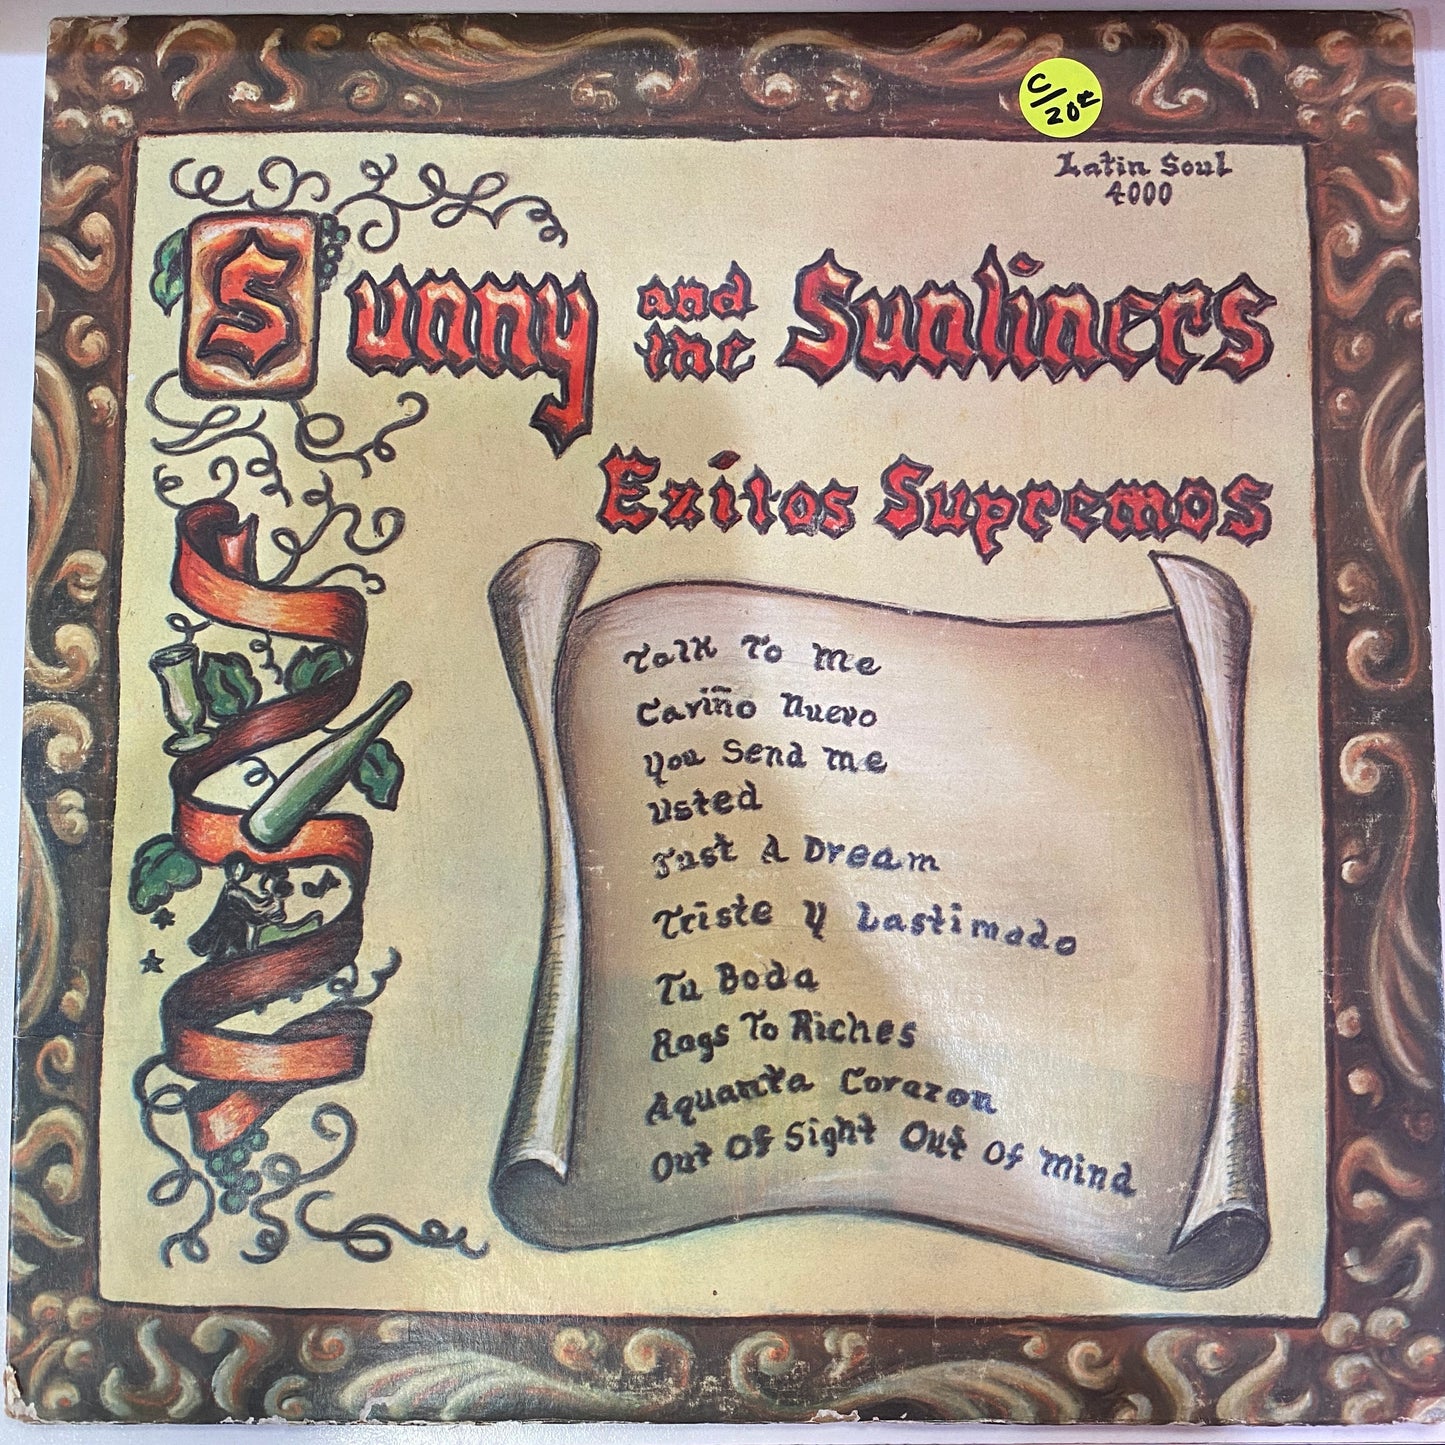 Sunny & the Sunliners- Exitos Supremos (Vinyl Cover)